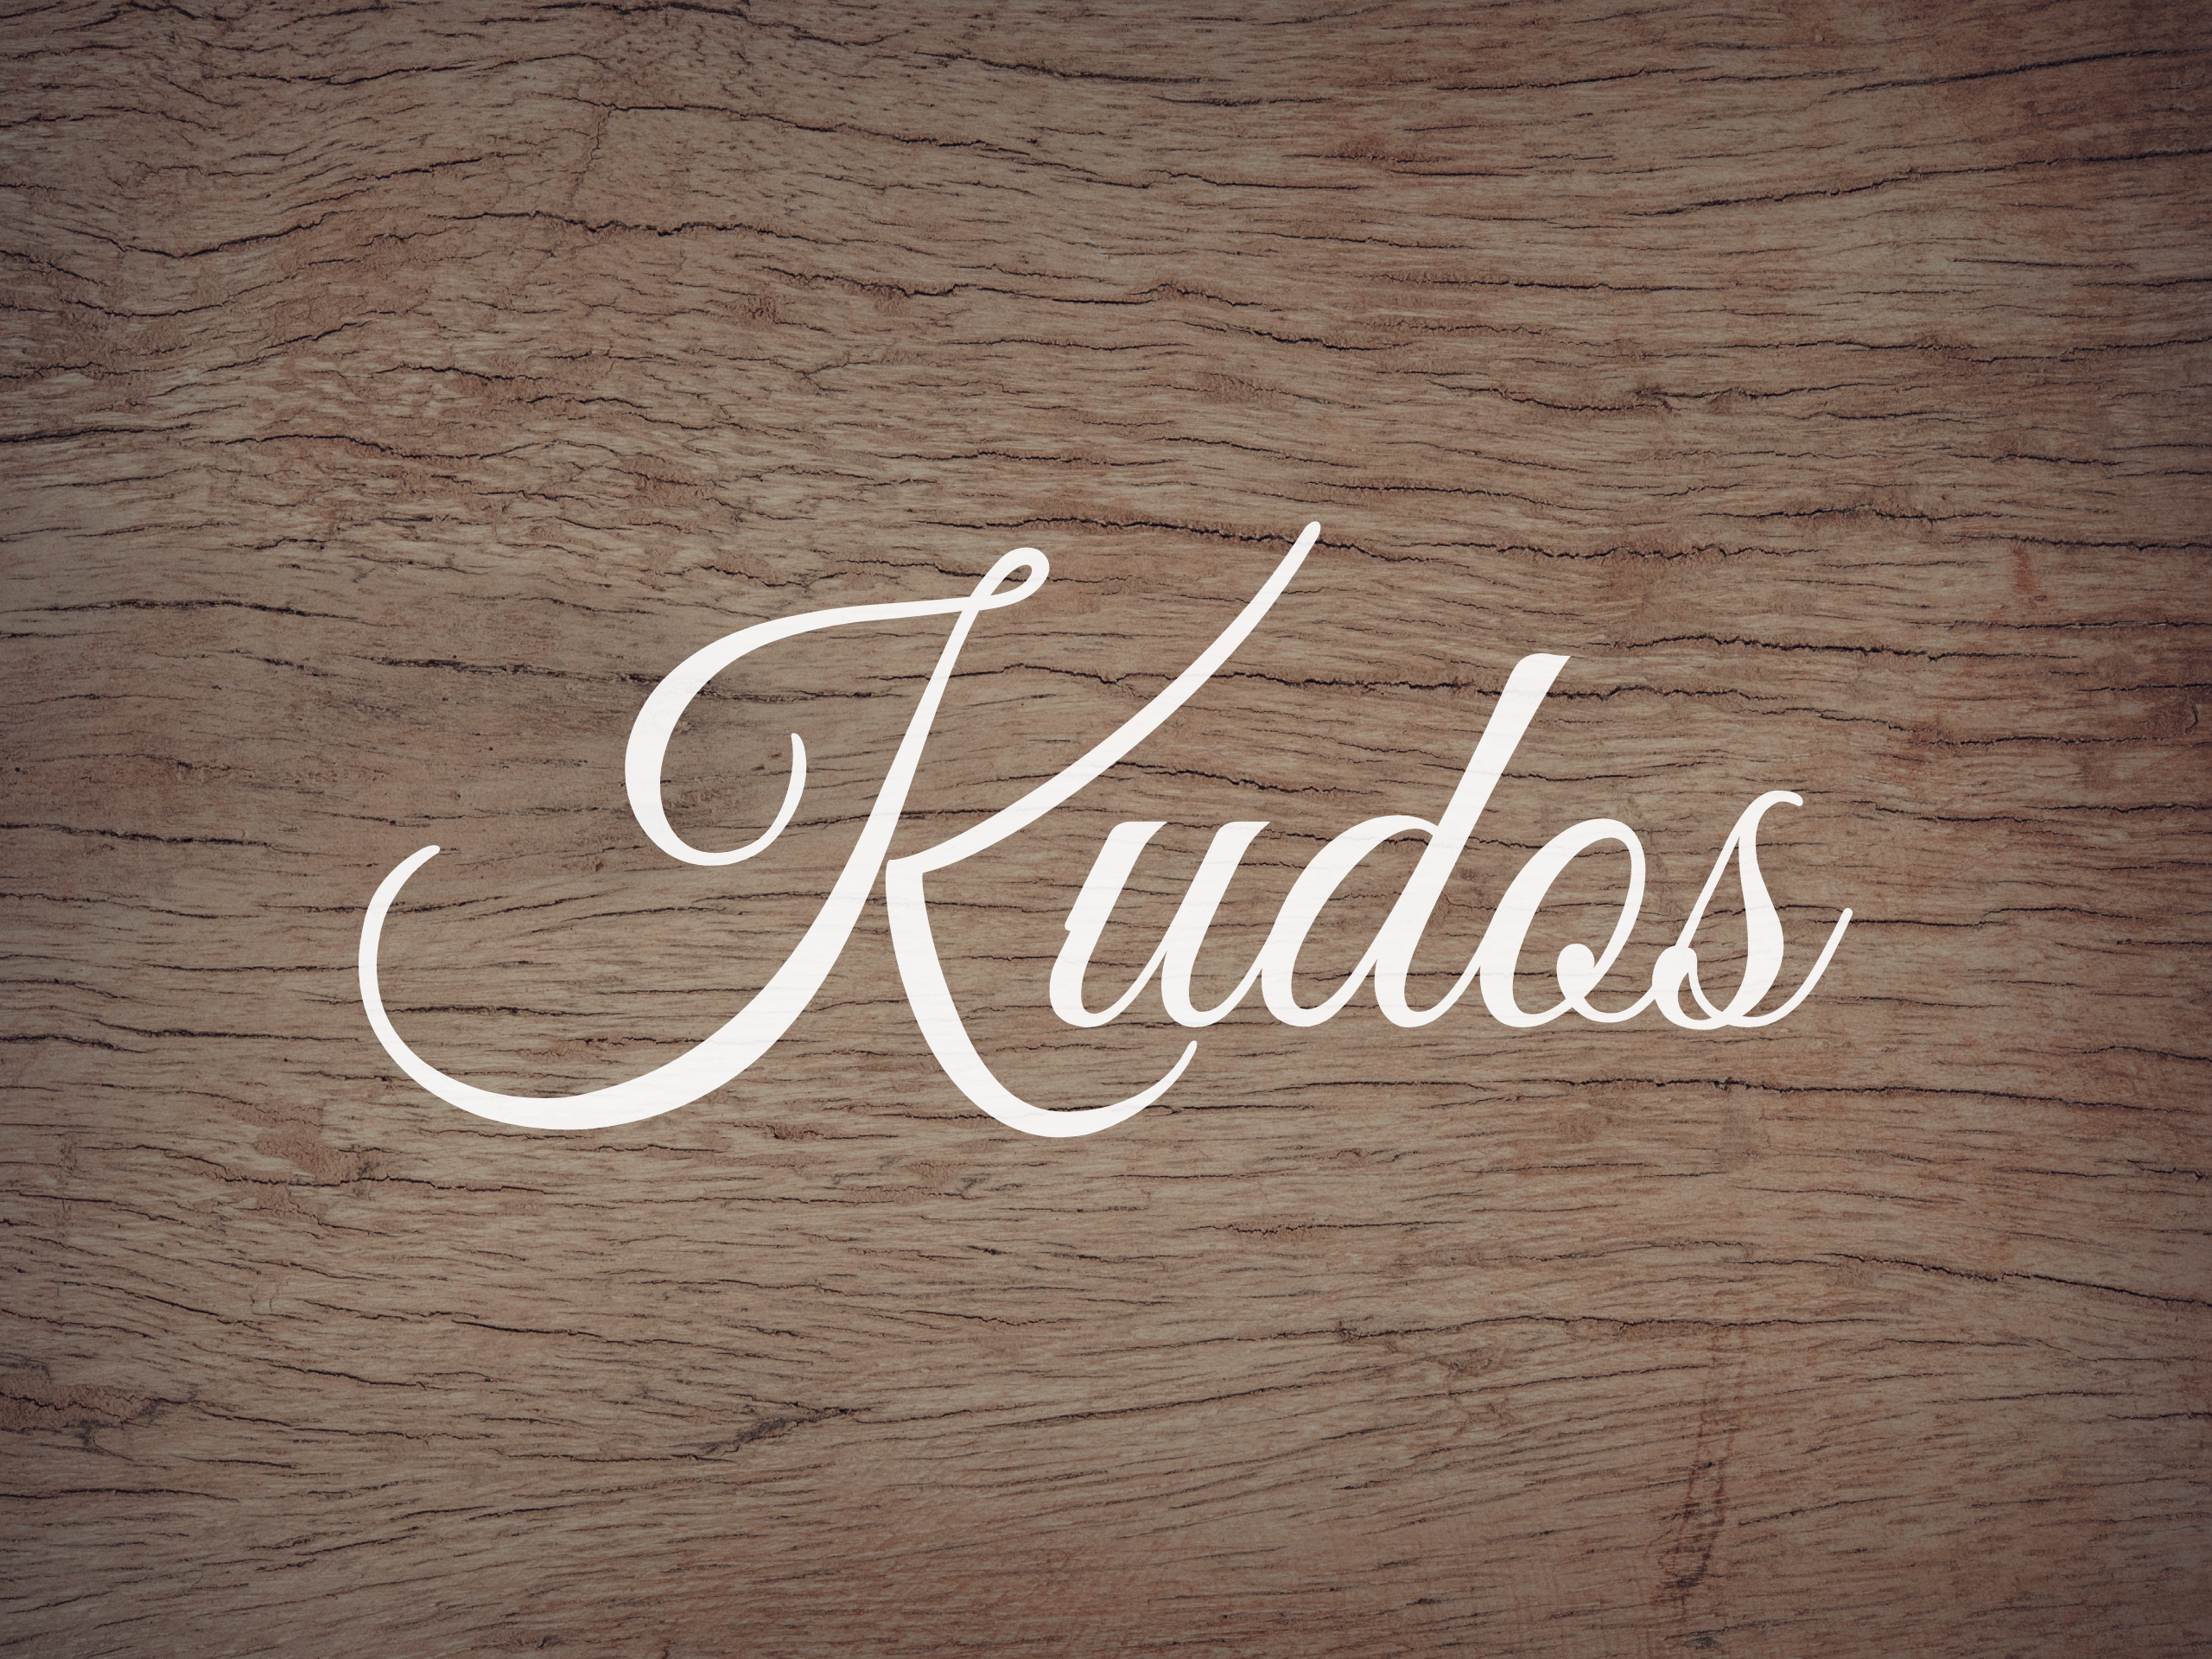 Kudos Decal - Holiday Graduation/Congratulations Vinyl Decals for Home, Gifts, Businesses and More!